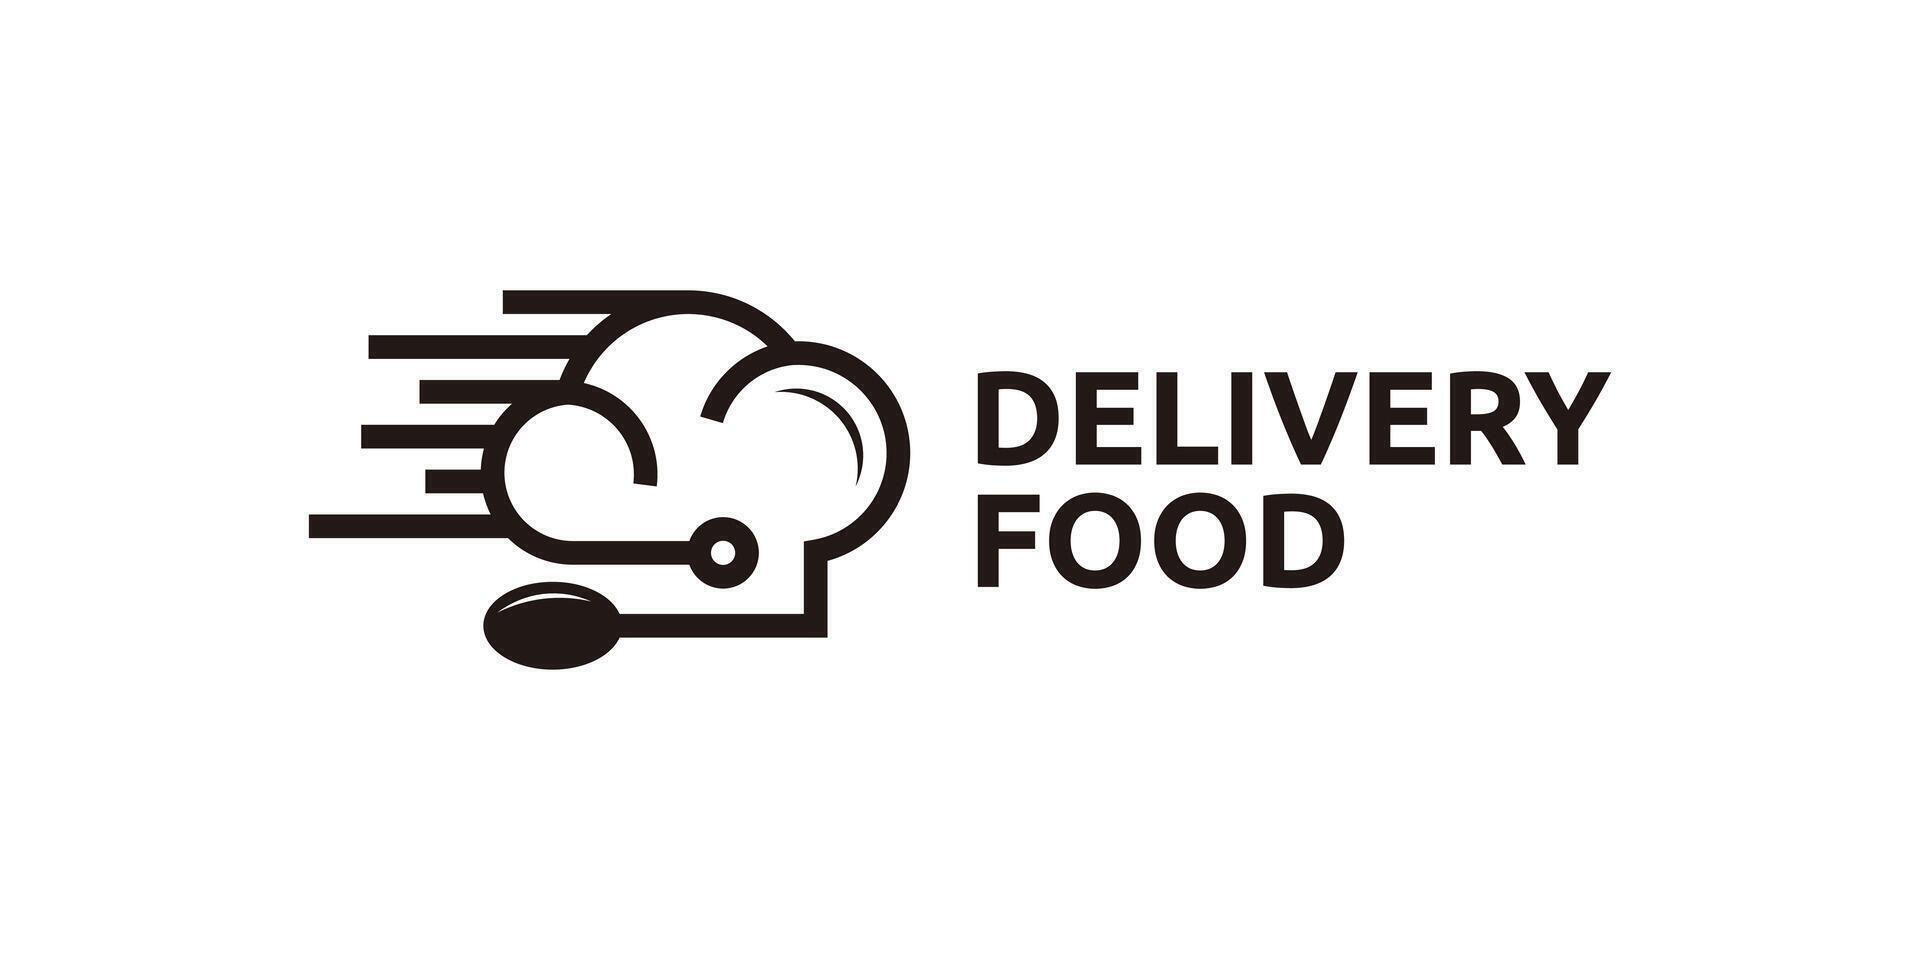 creative food delivery logo design, chef hat and speed, logo design templates, symbols, icons, creative ideas. vector